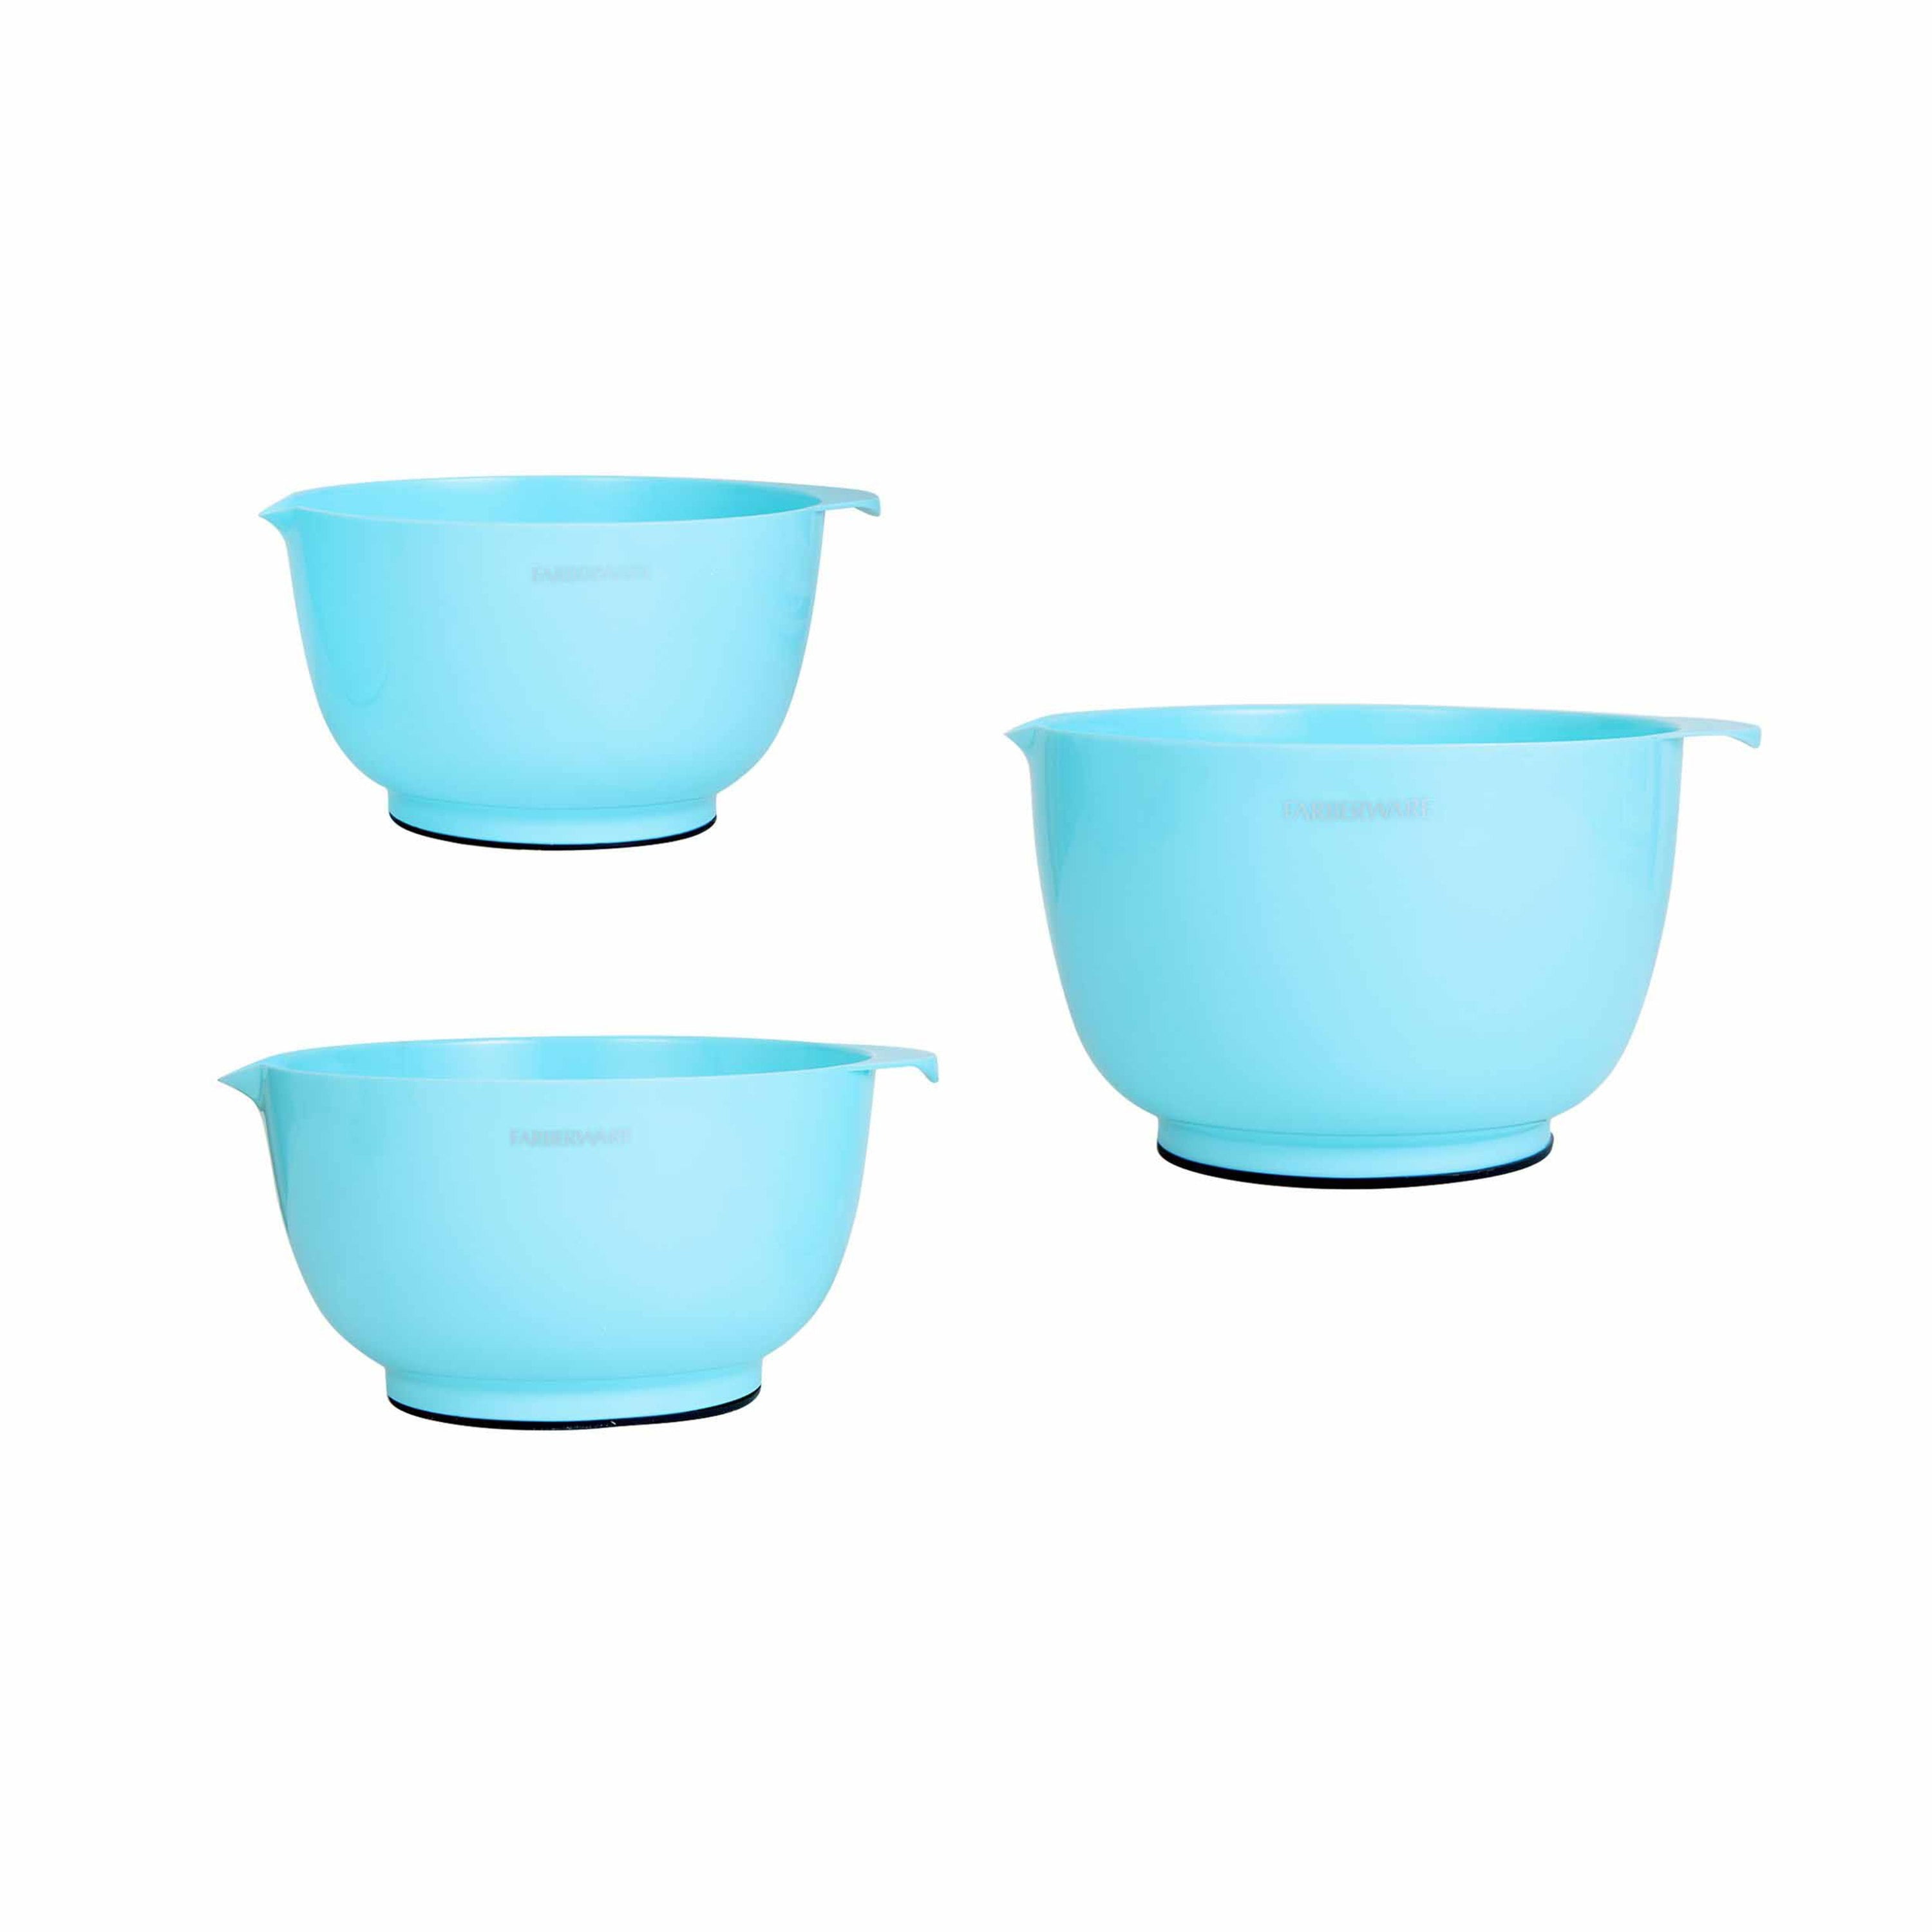 This On-Sale Mixing Bowl Set With 9,400+ Perfect Ratings Helps